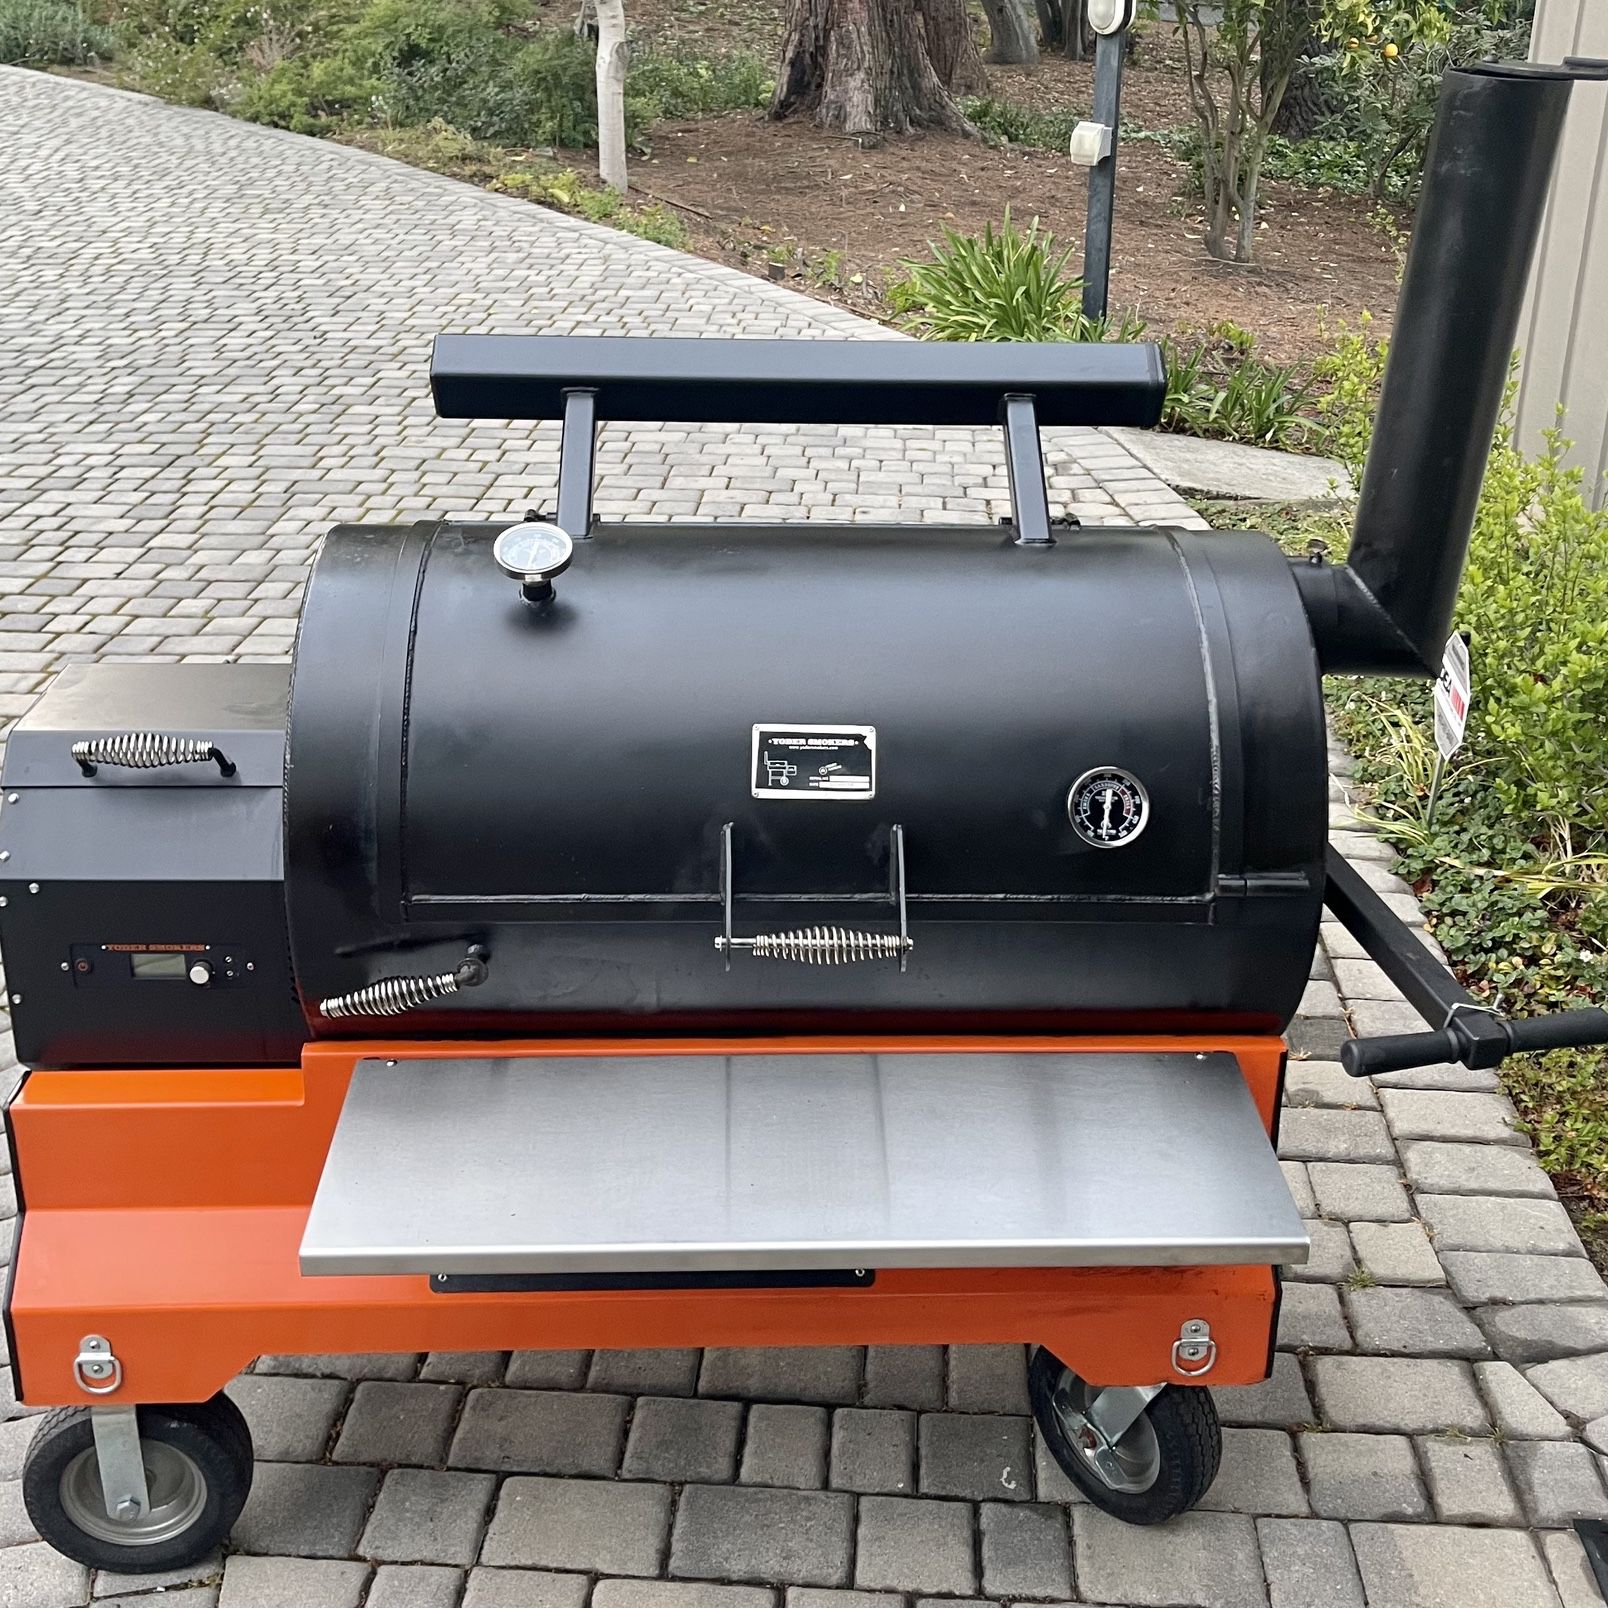 YS1500SCOMPETITIONPELLETGRILL by Yoder Smokers - YS1500 S Competition  Pellet Grill